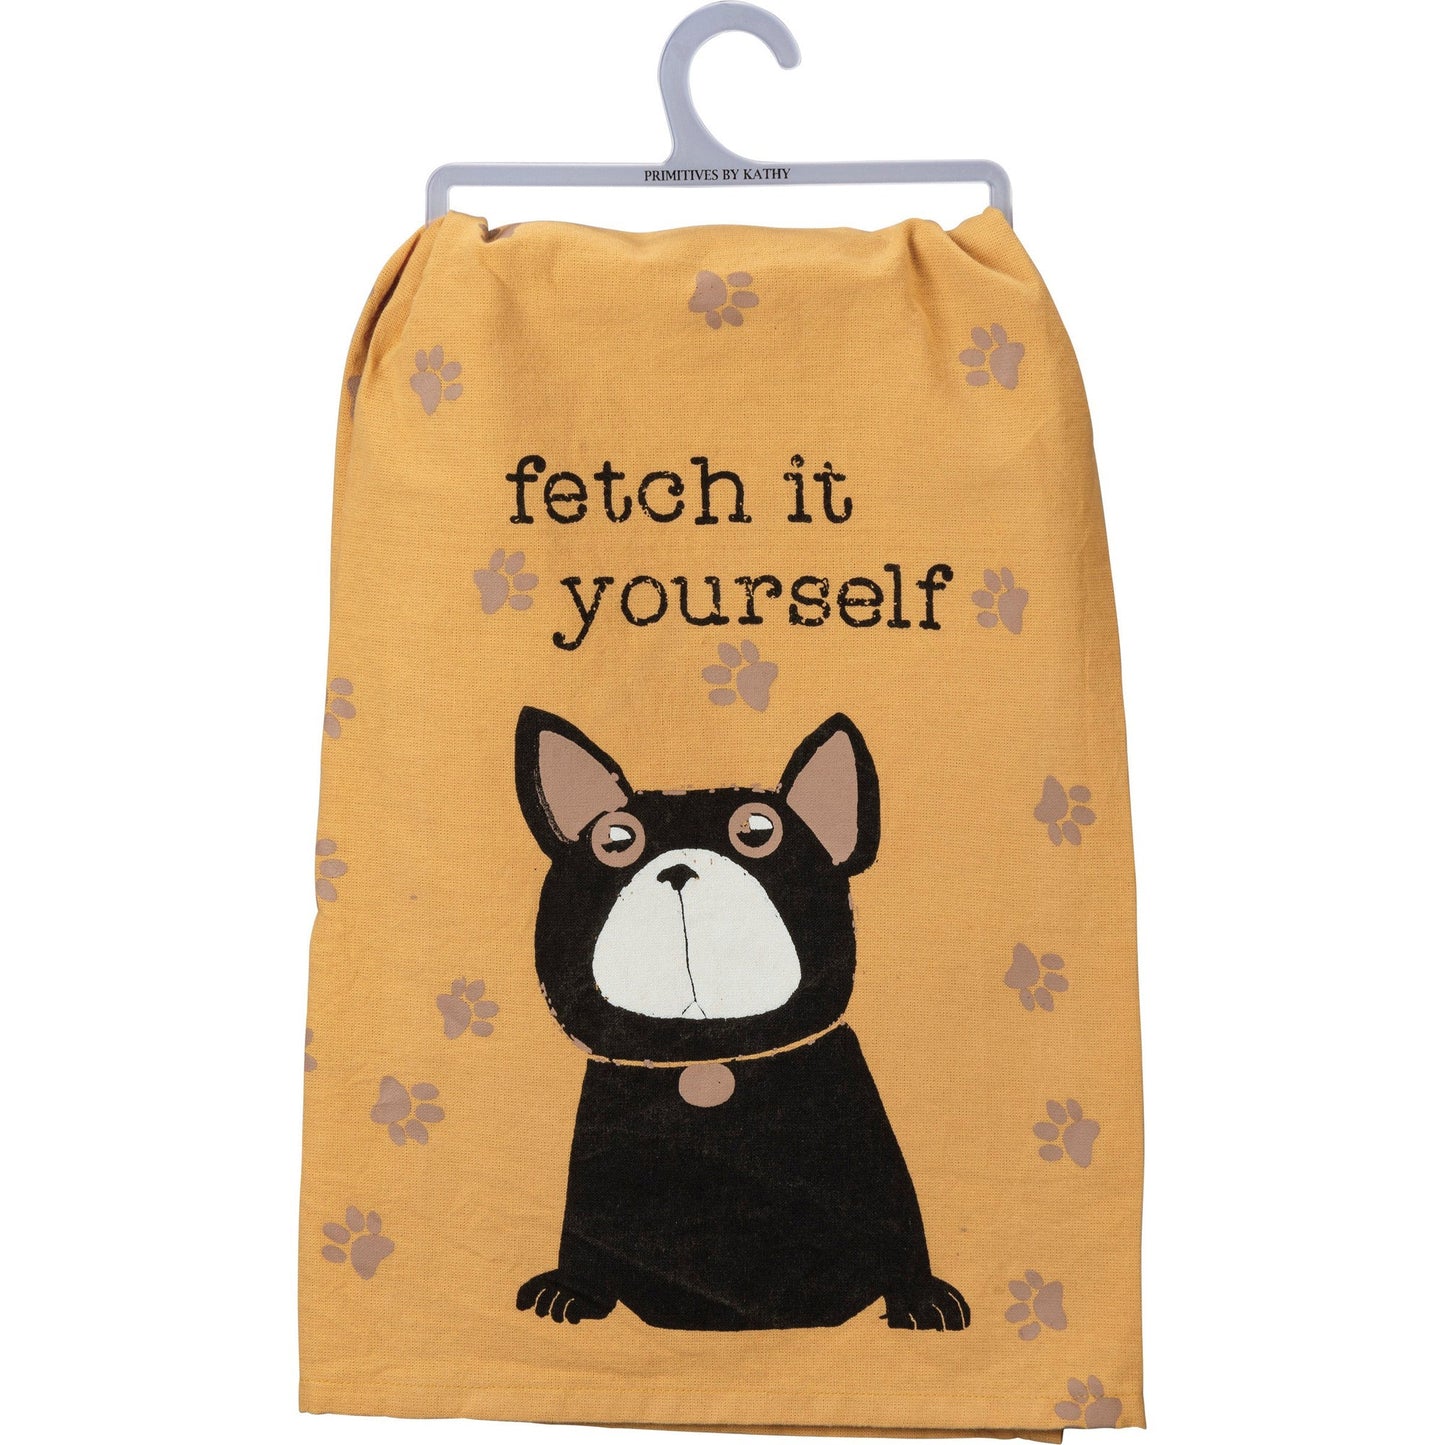 Fetch It Yourself Dish Cloth Towel | Novelty Silly Tea Towels | Cute Kitchen Hand Towel | Pets, Dogs, Paw Print | 28" Square